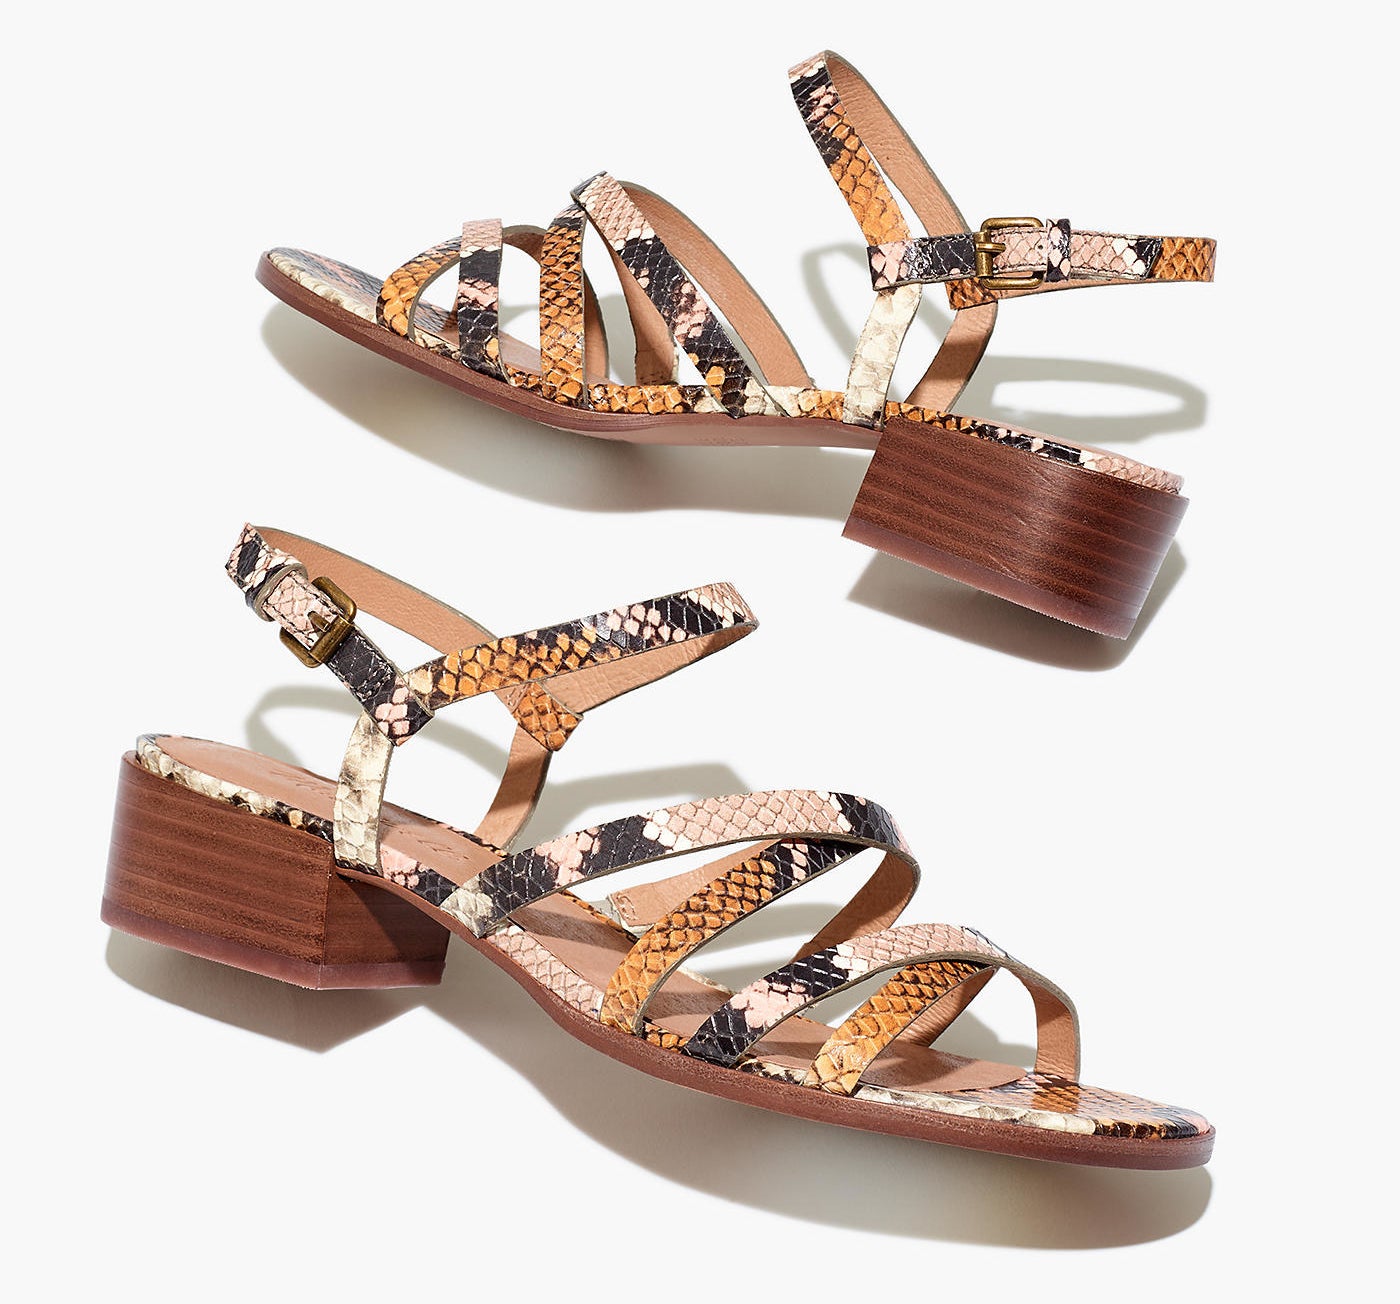 Strappy sandals with a small chunky heel and buckle back in a black, white, pink, and orange snakeskin print